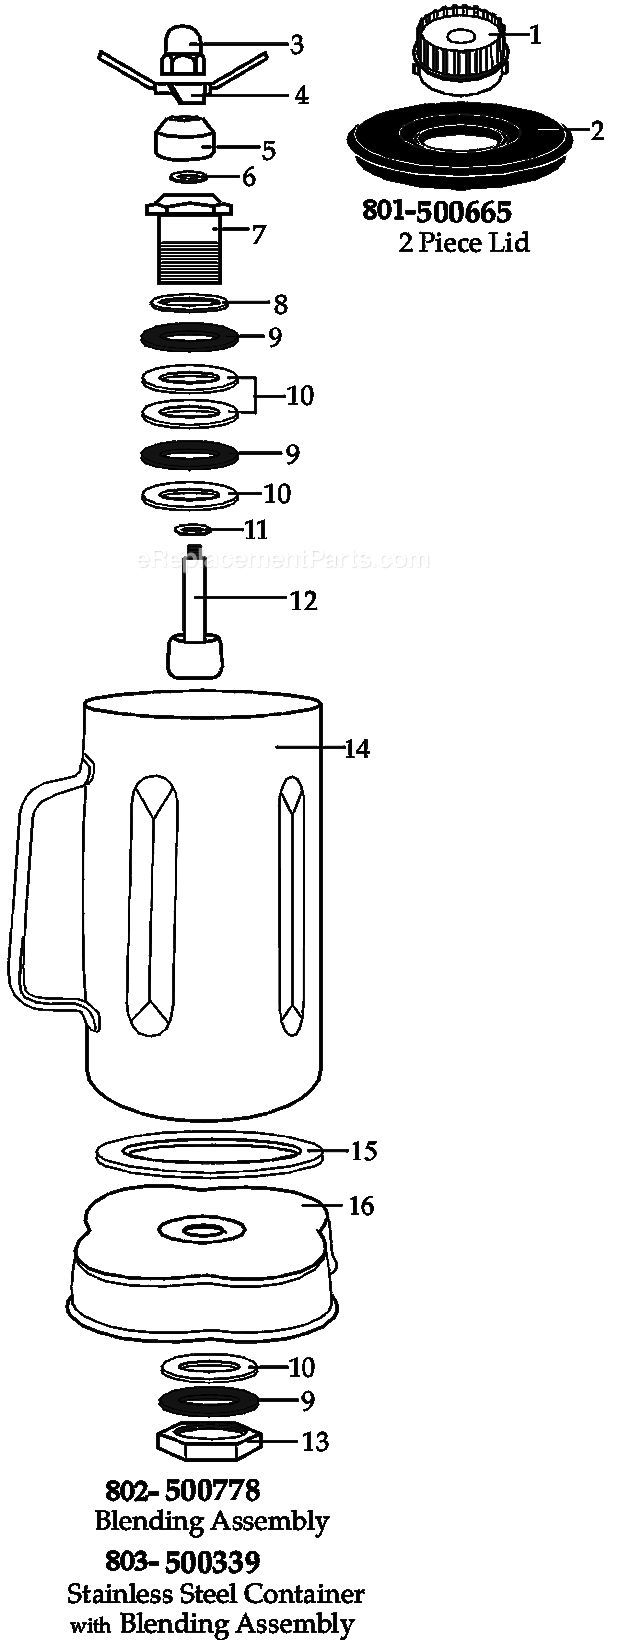 Waring CAC33 Stainless Steel Container 32_Oz_Container_W_Blending_Assembly_And_Lid Diagram